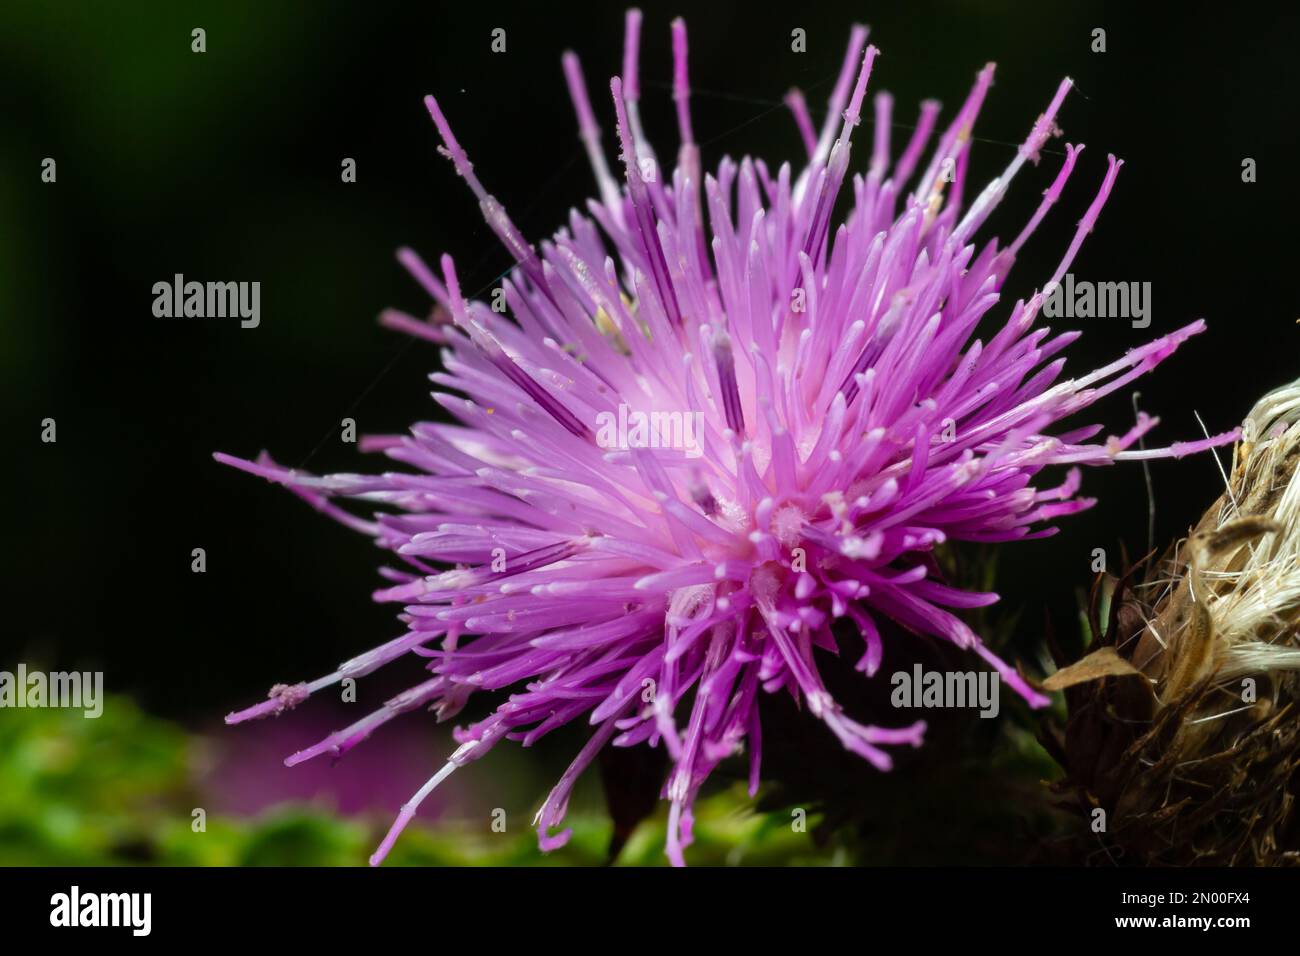 Carduus crispus among flowering plants in the aster family, Asteraceae, and the tribe Cynareae. Stock Photo